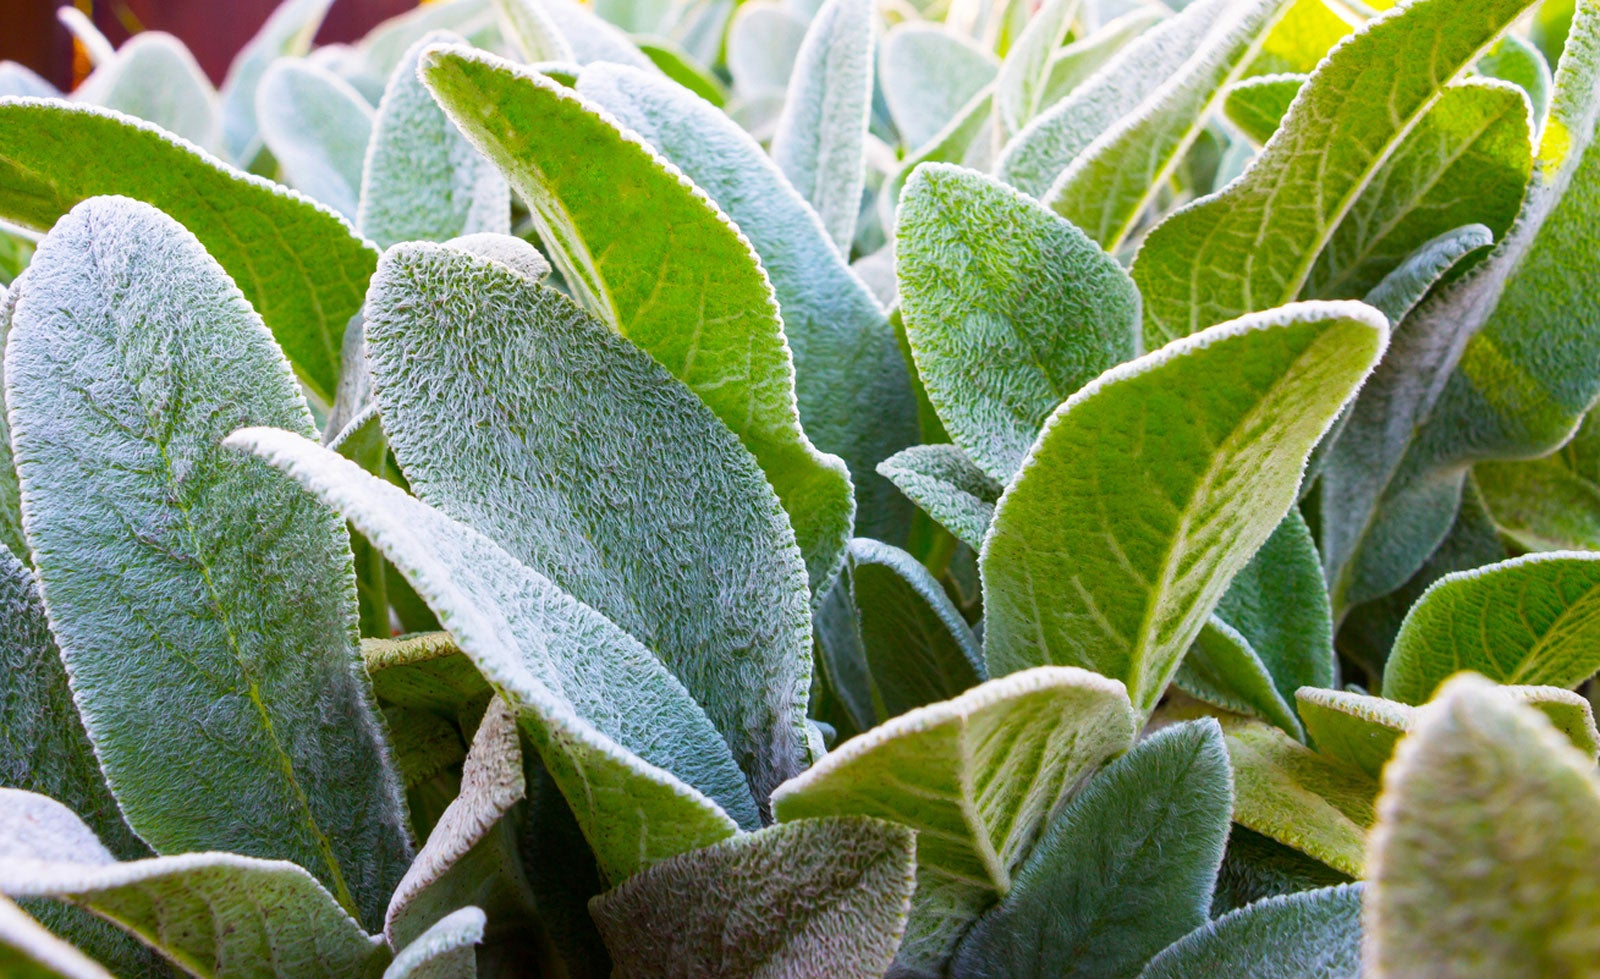 Growing Lamb's Ear: How To Plant Lamb's Ears